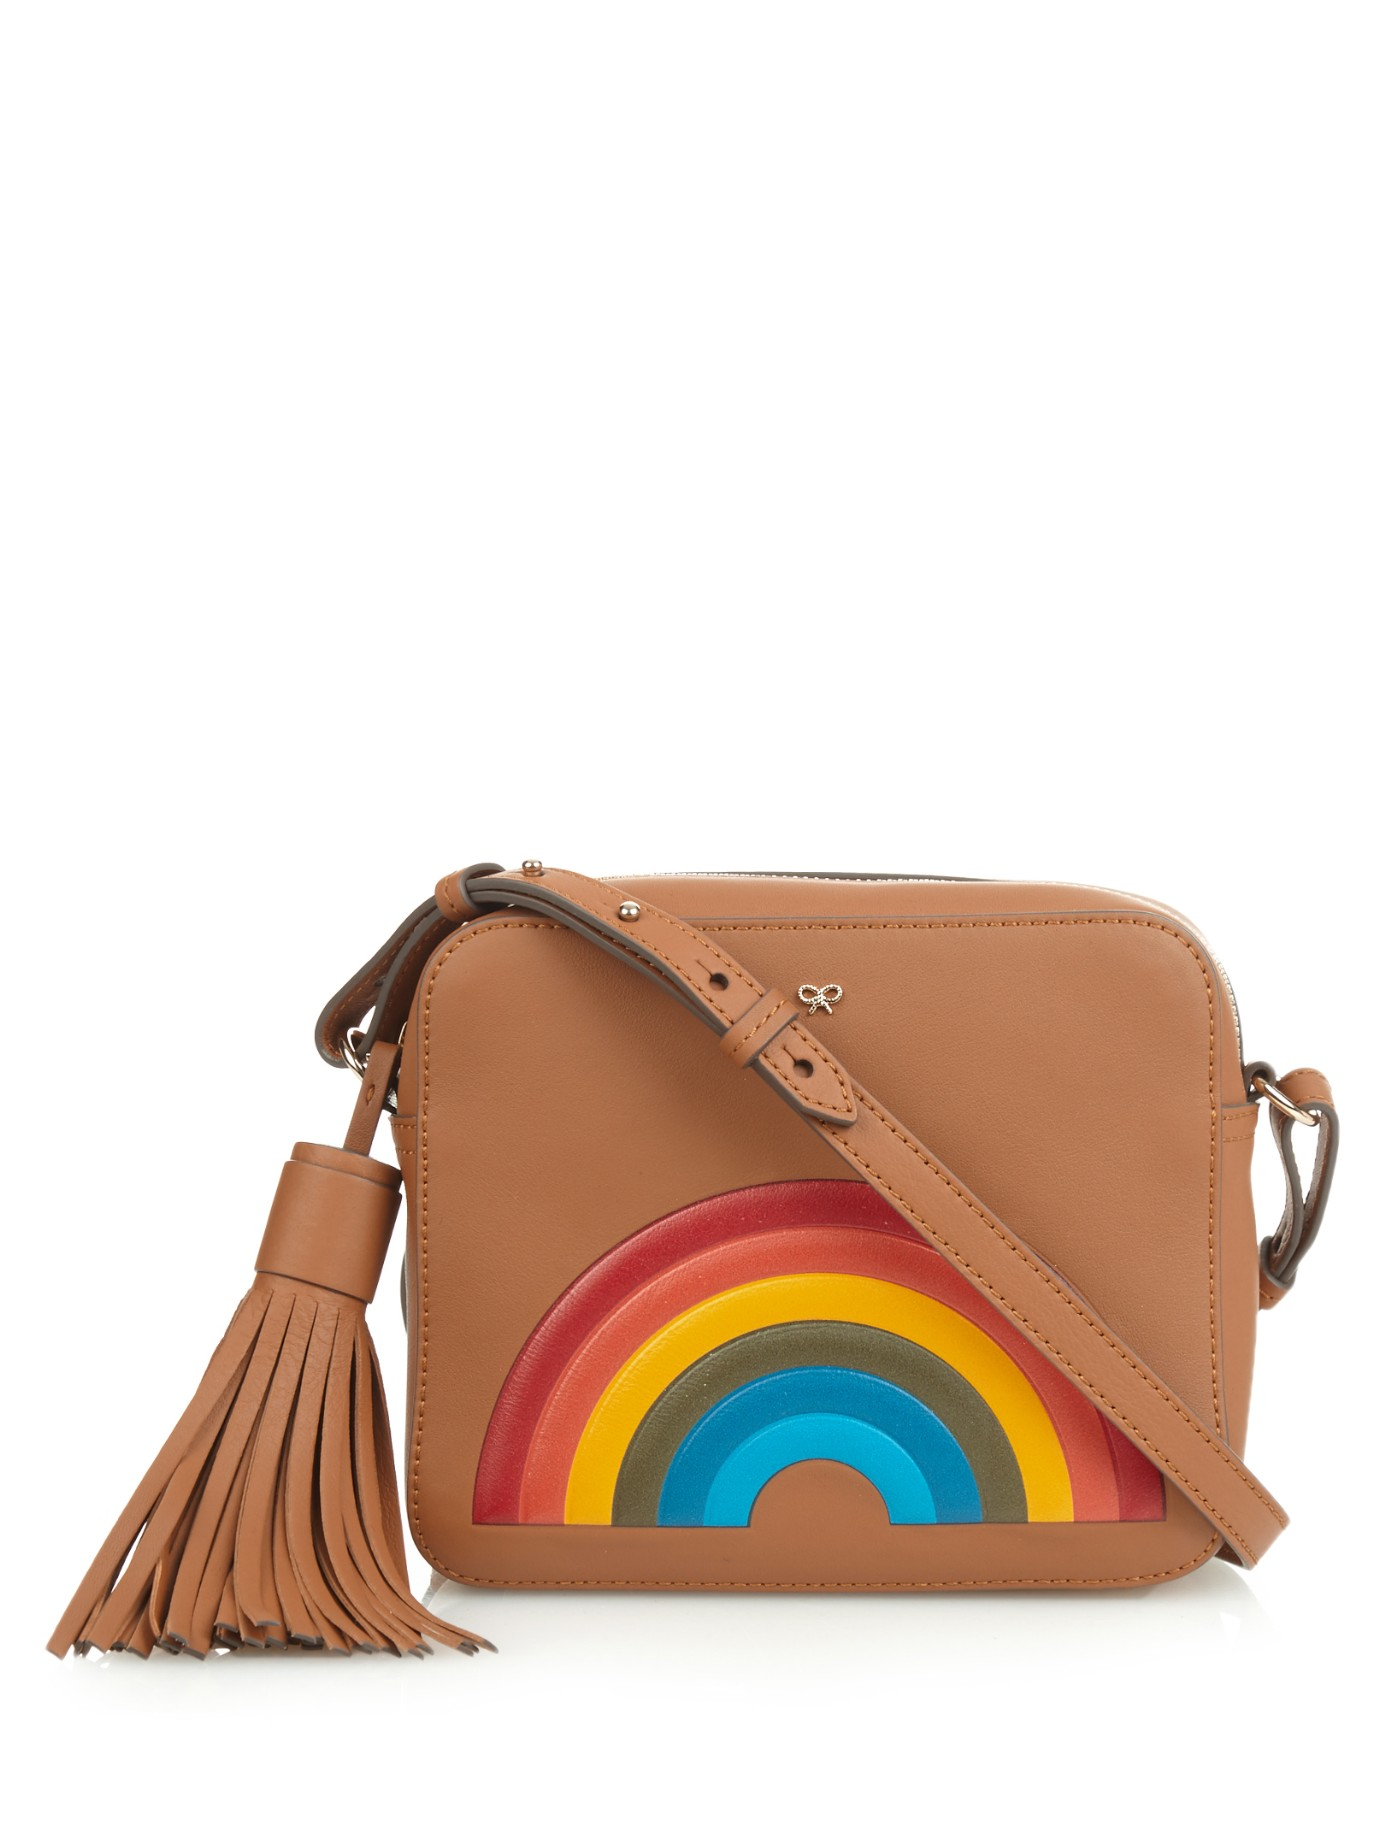 Anya Hindmarch Rainbow Leather Cross-Body Bag in Brown - Lyst